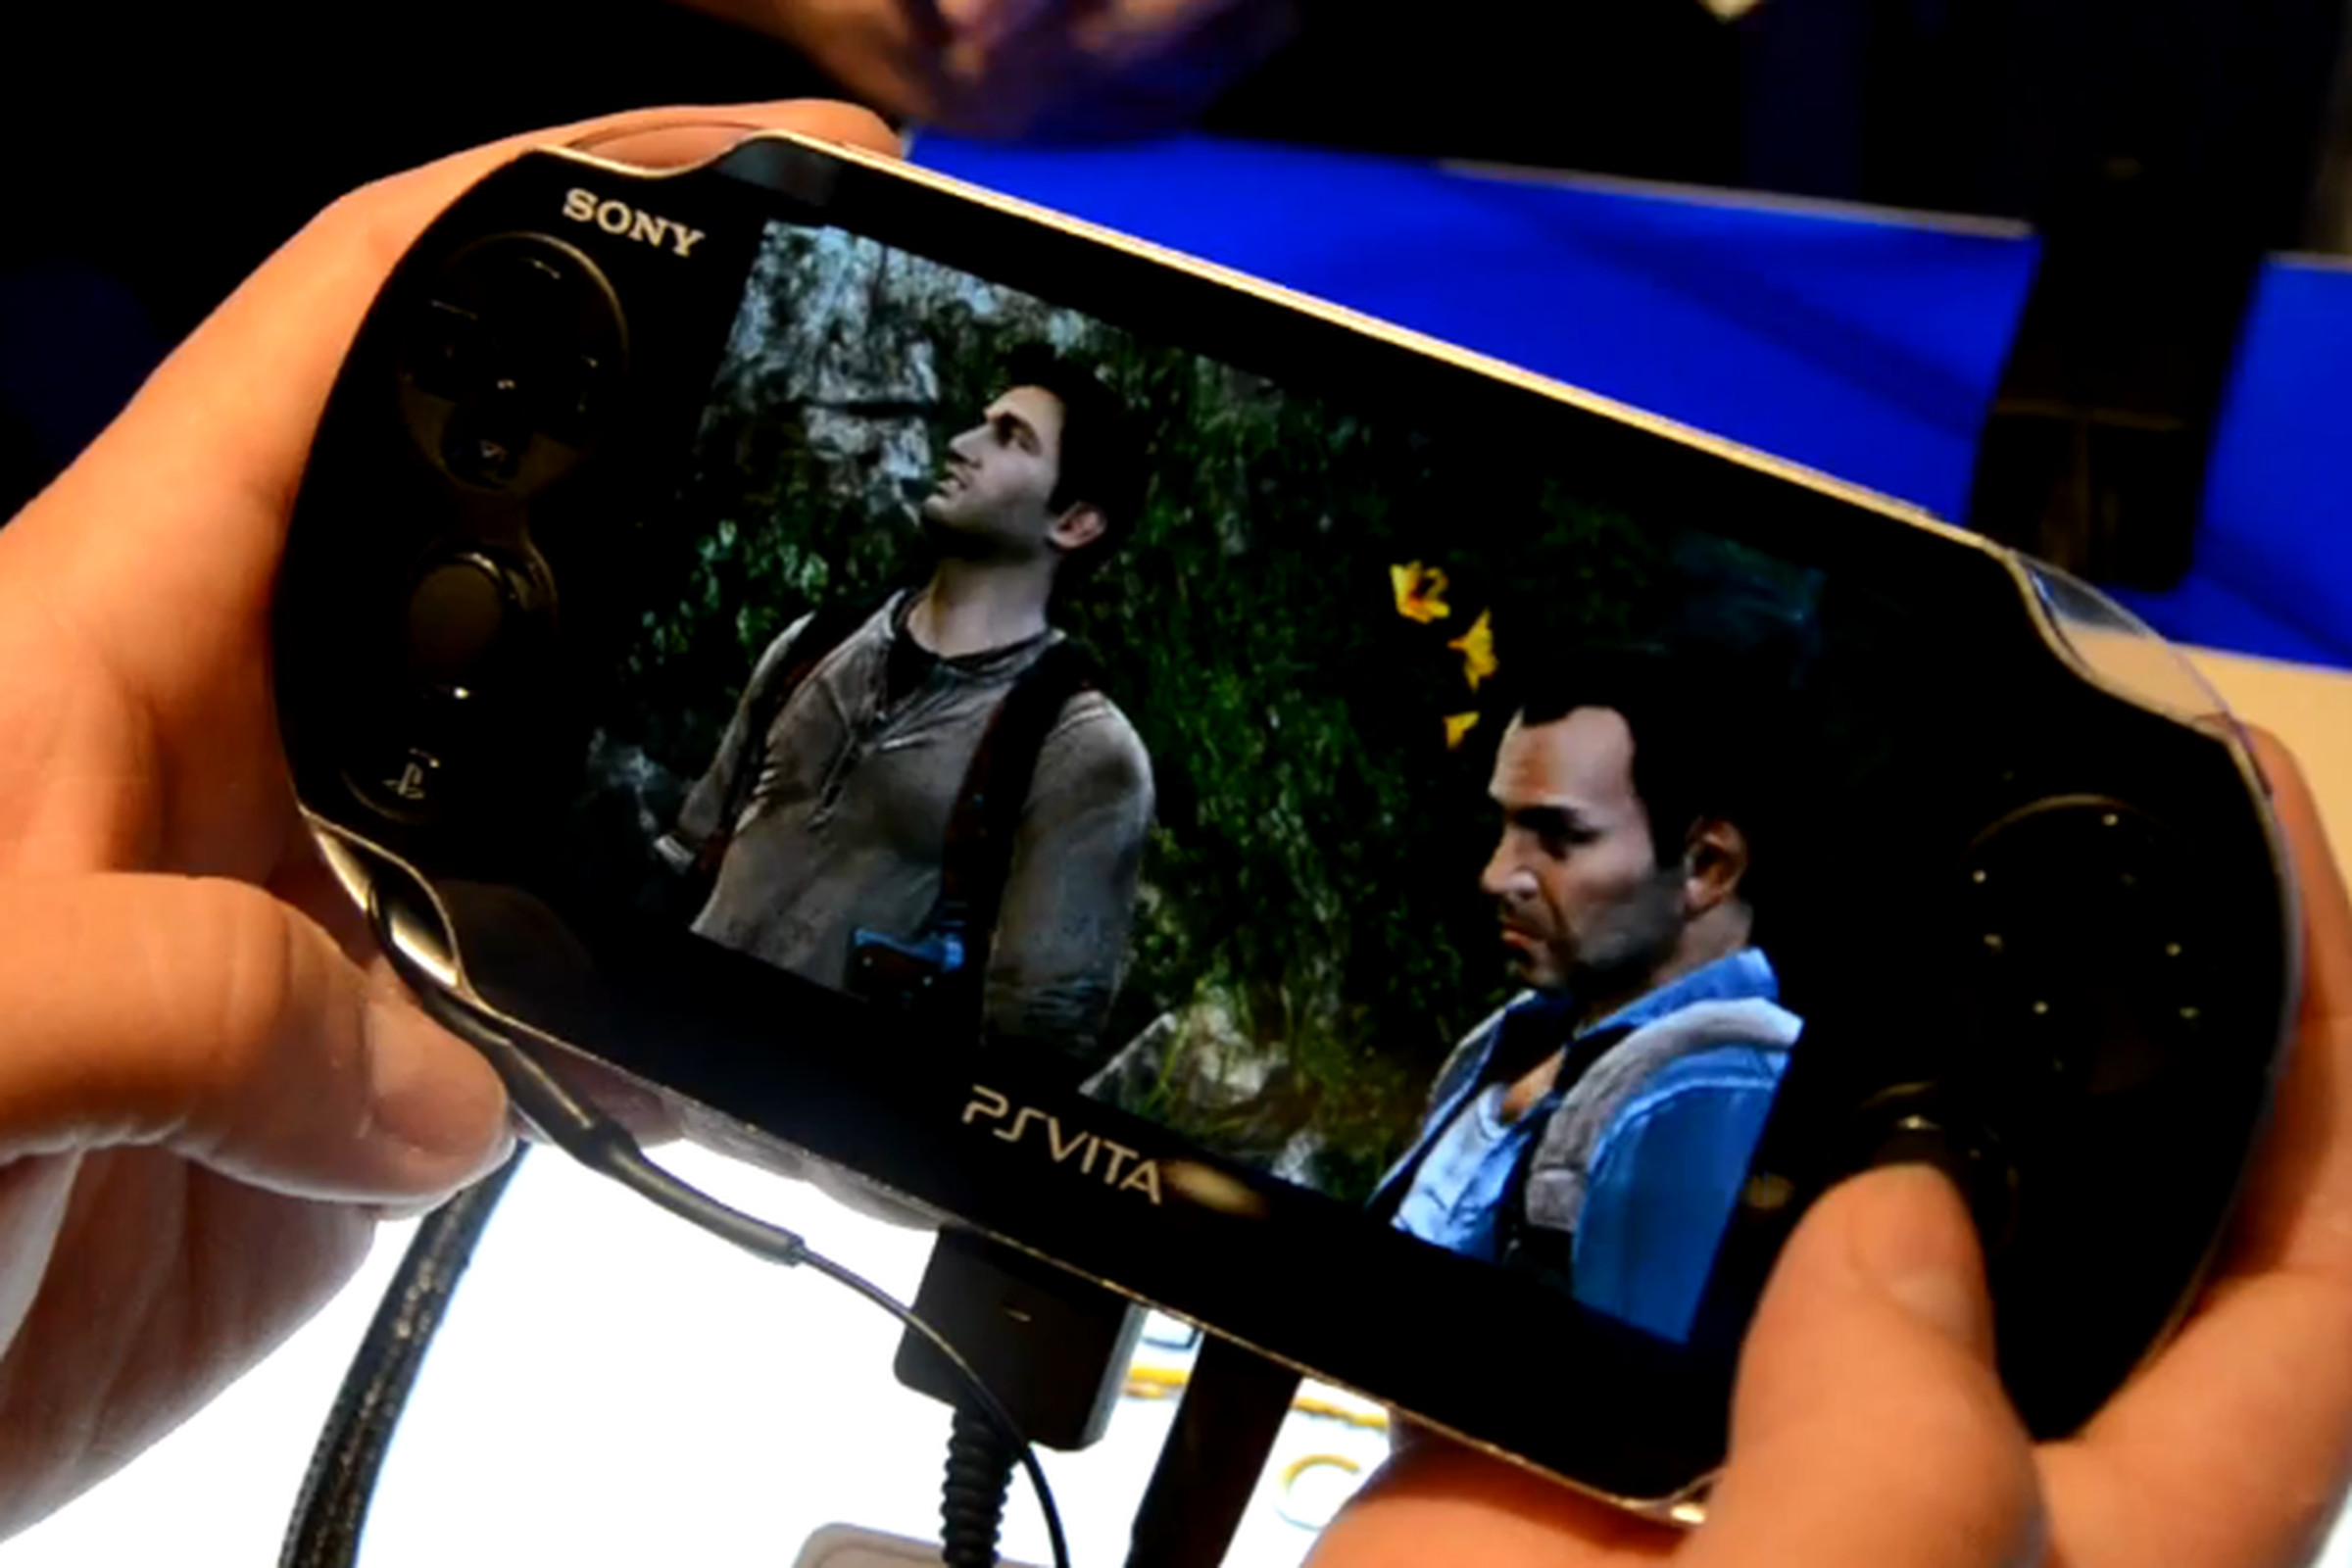 Uncharted for PlayStation Vita hands-on at E3 2011